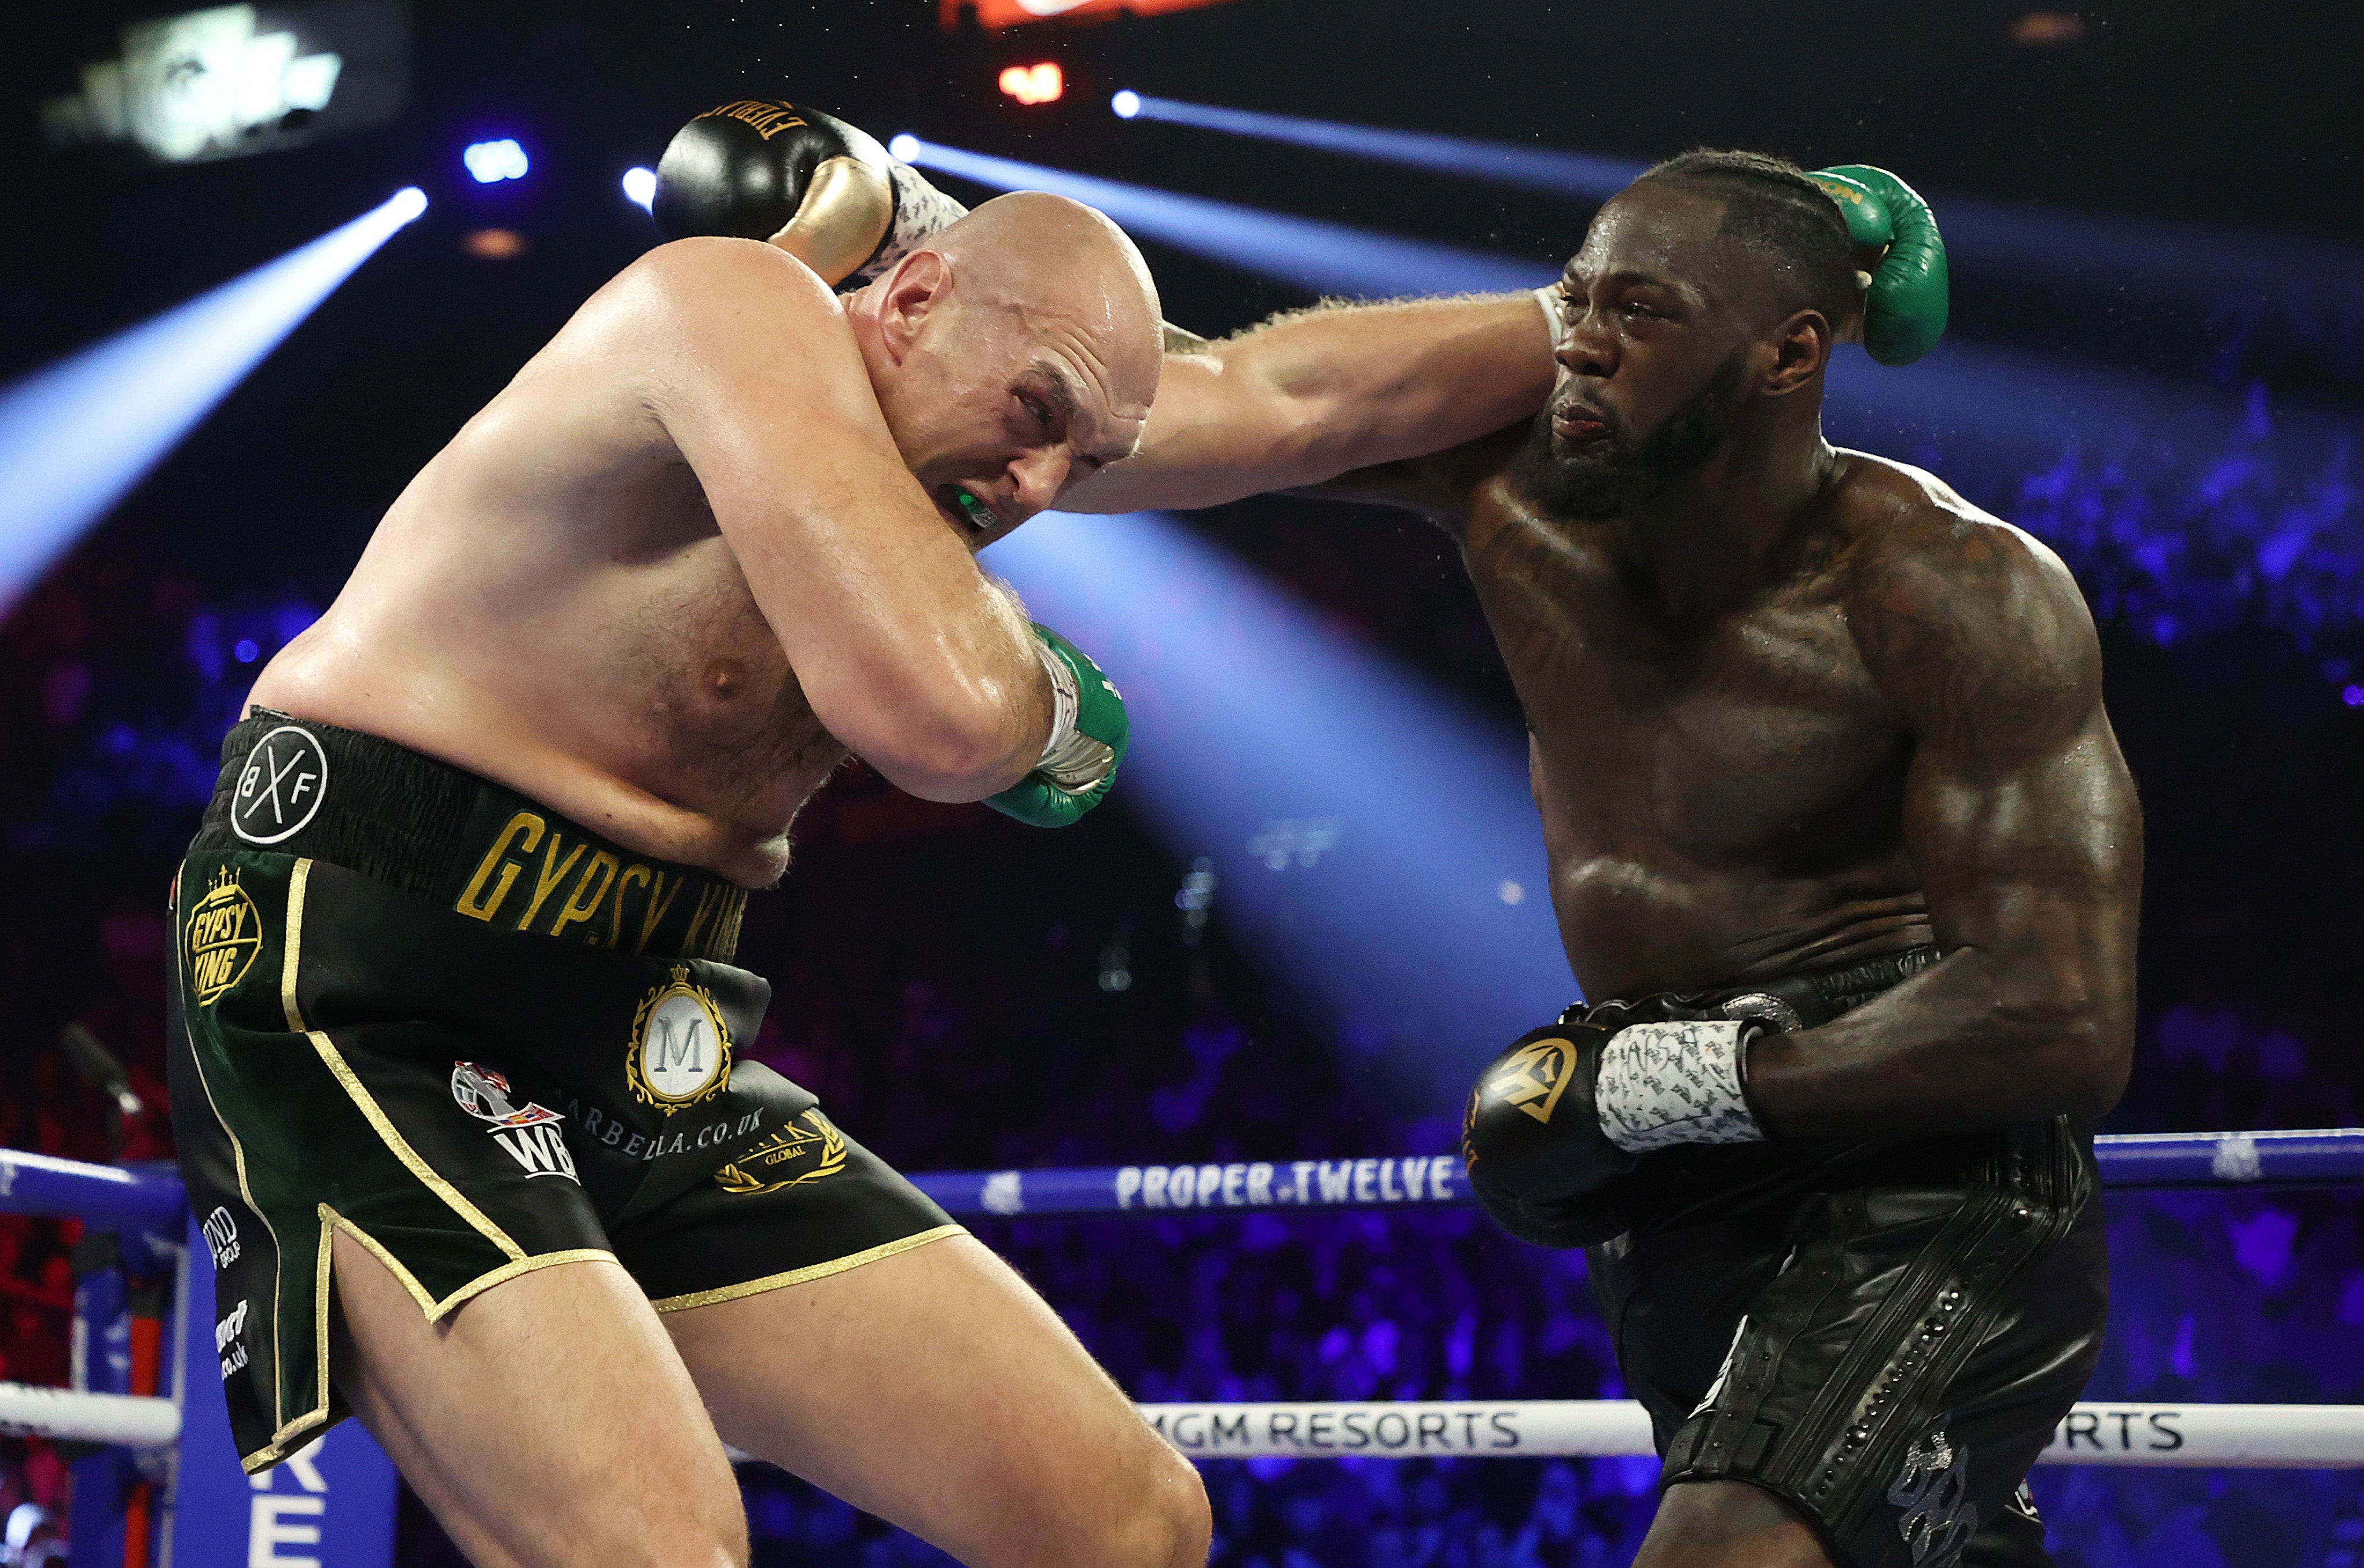 Wilder’s third fight against Fury was postponed as the Briton said he had tested positive for Covid